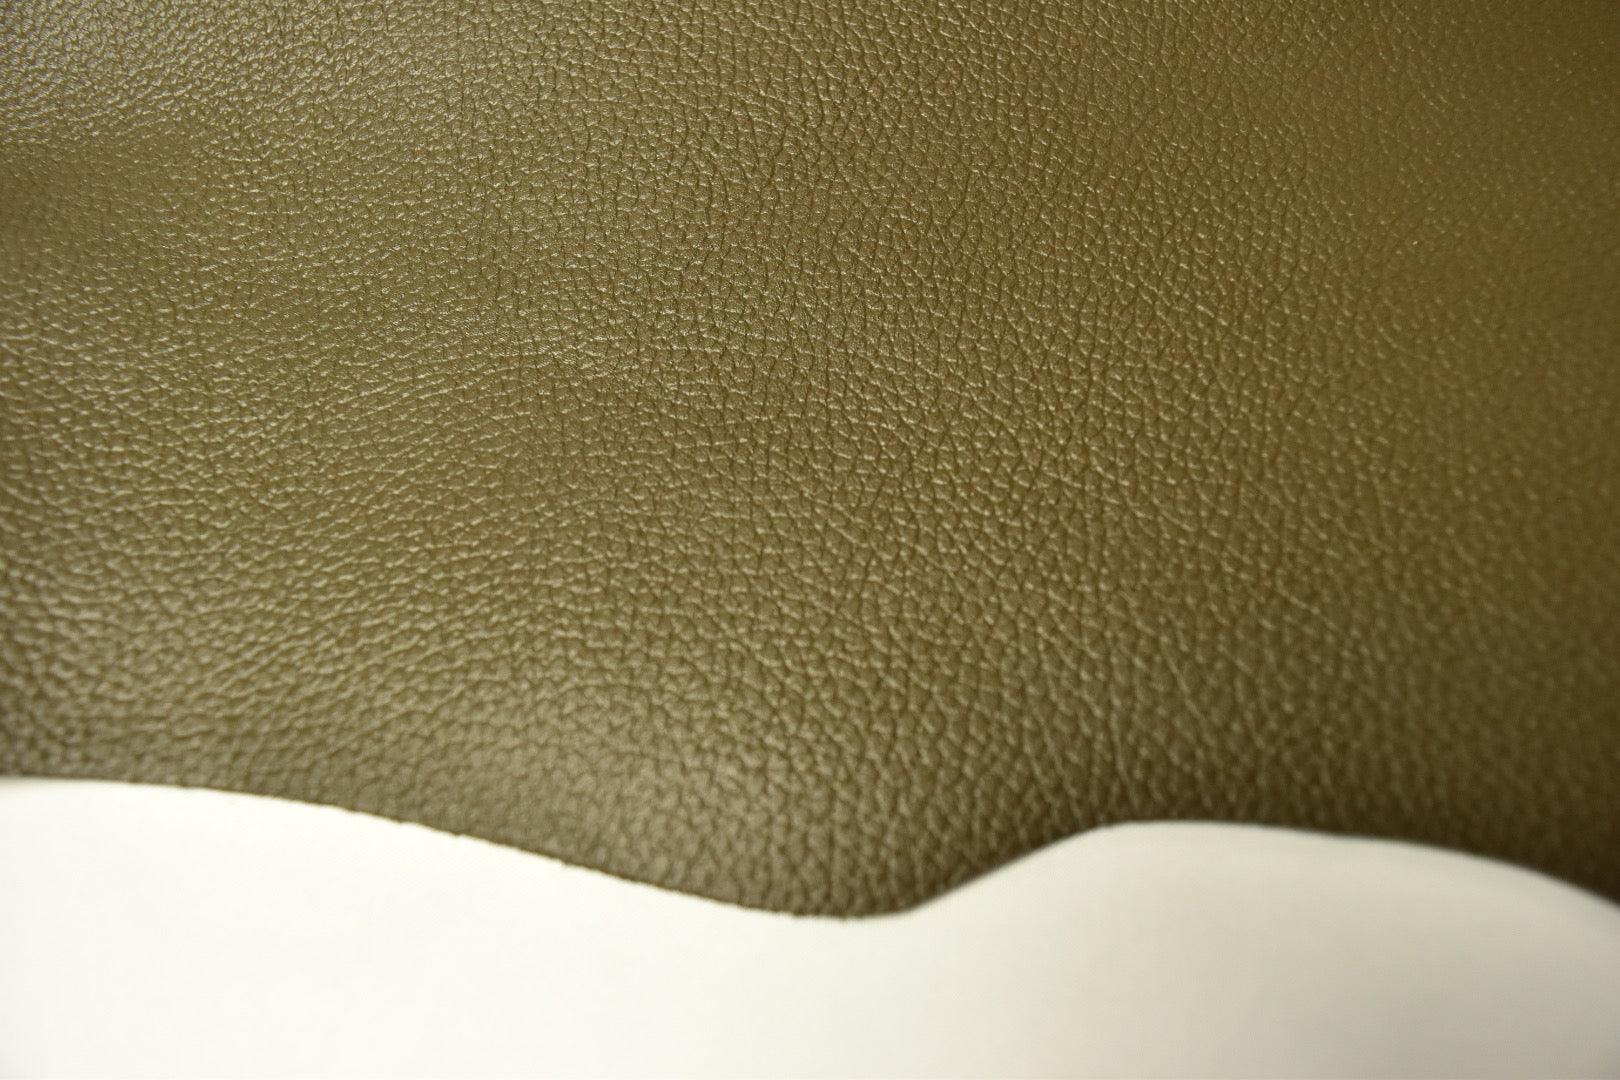 togo grain top layer leather100%wear-resistingcow leather